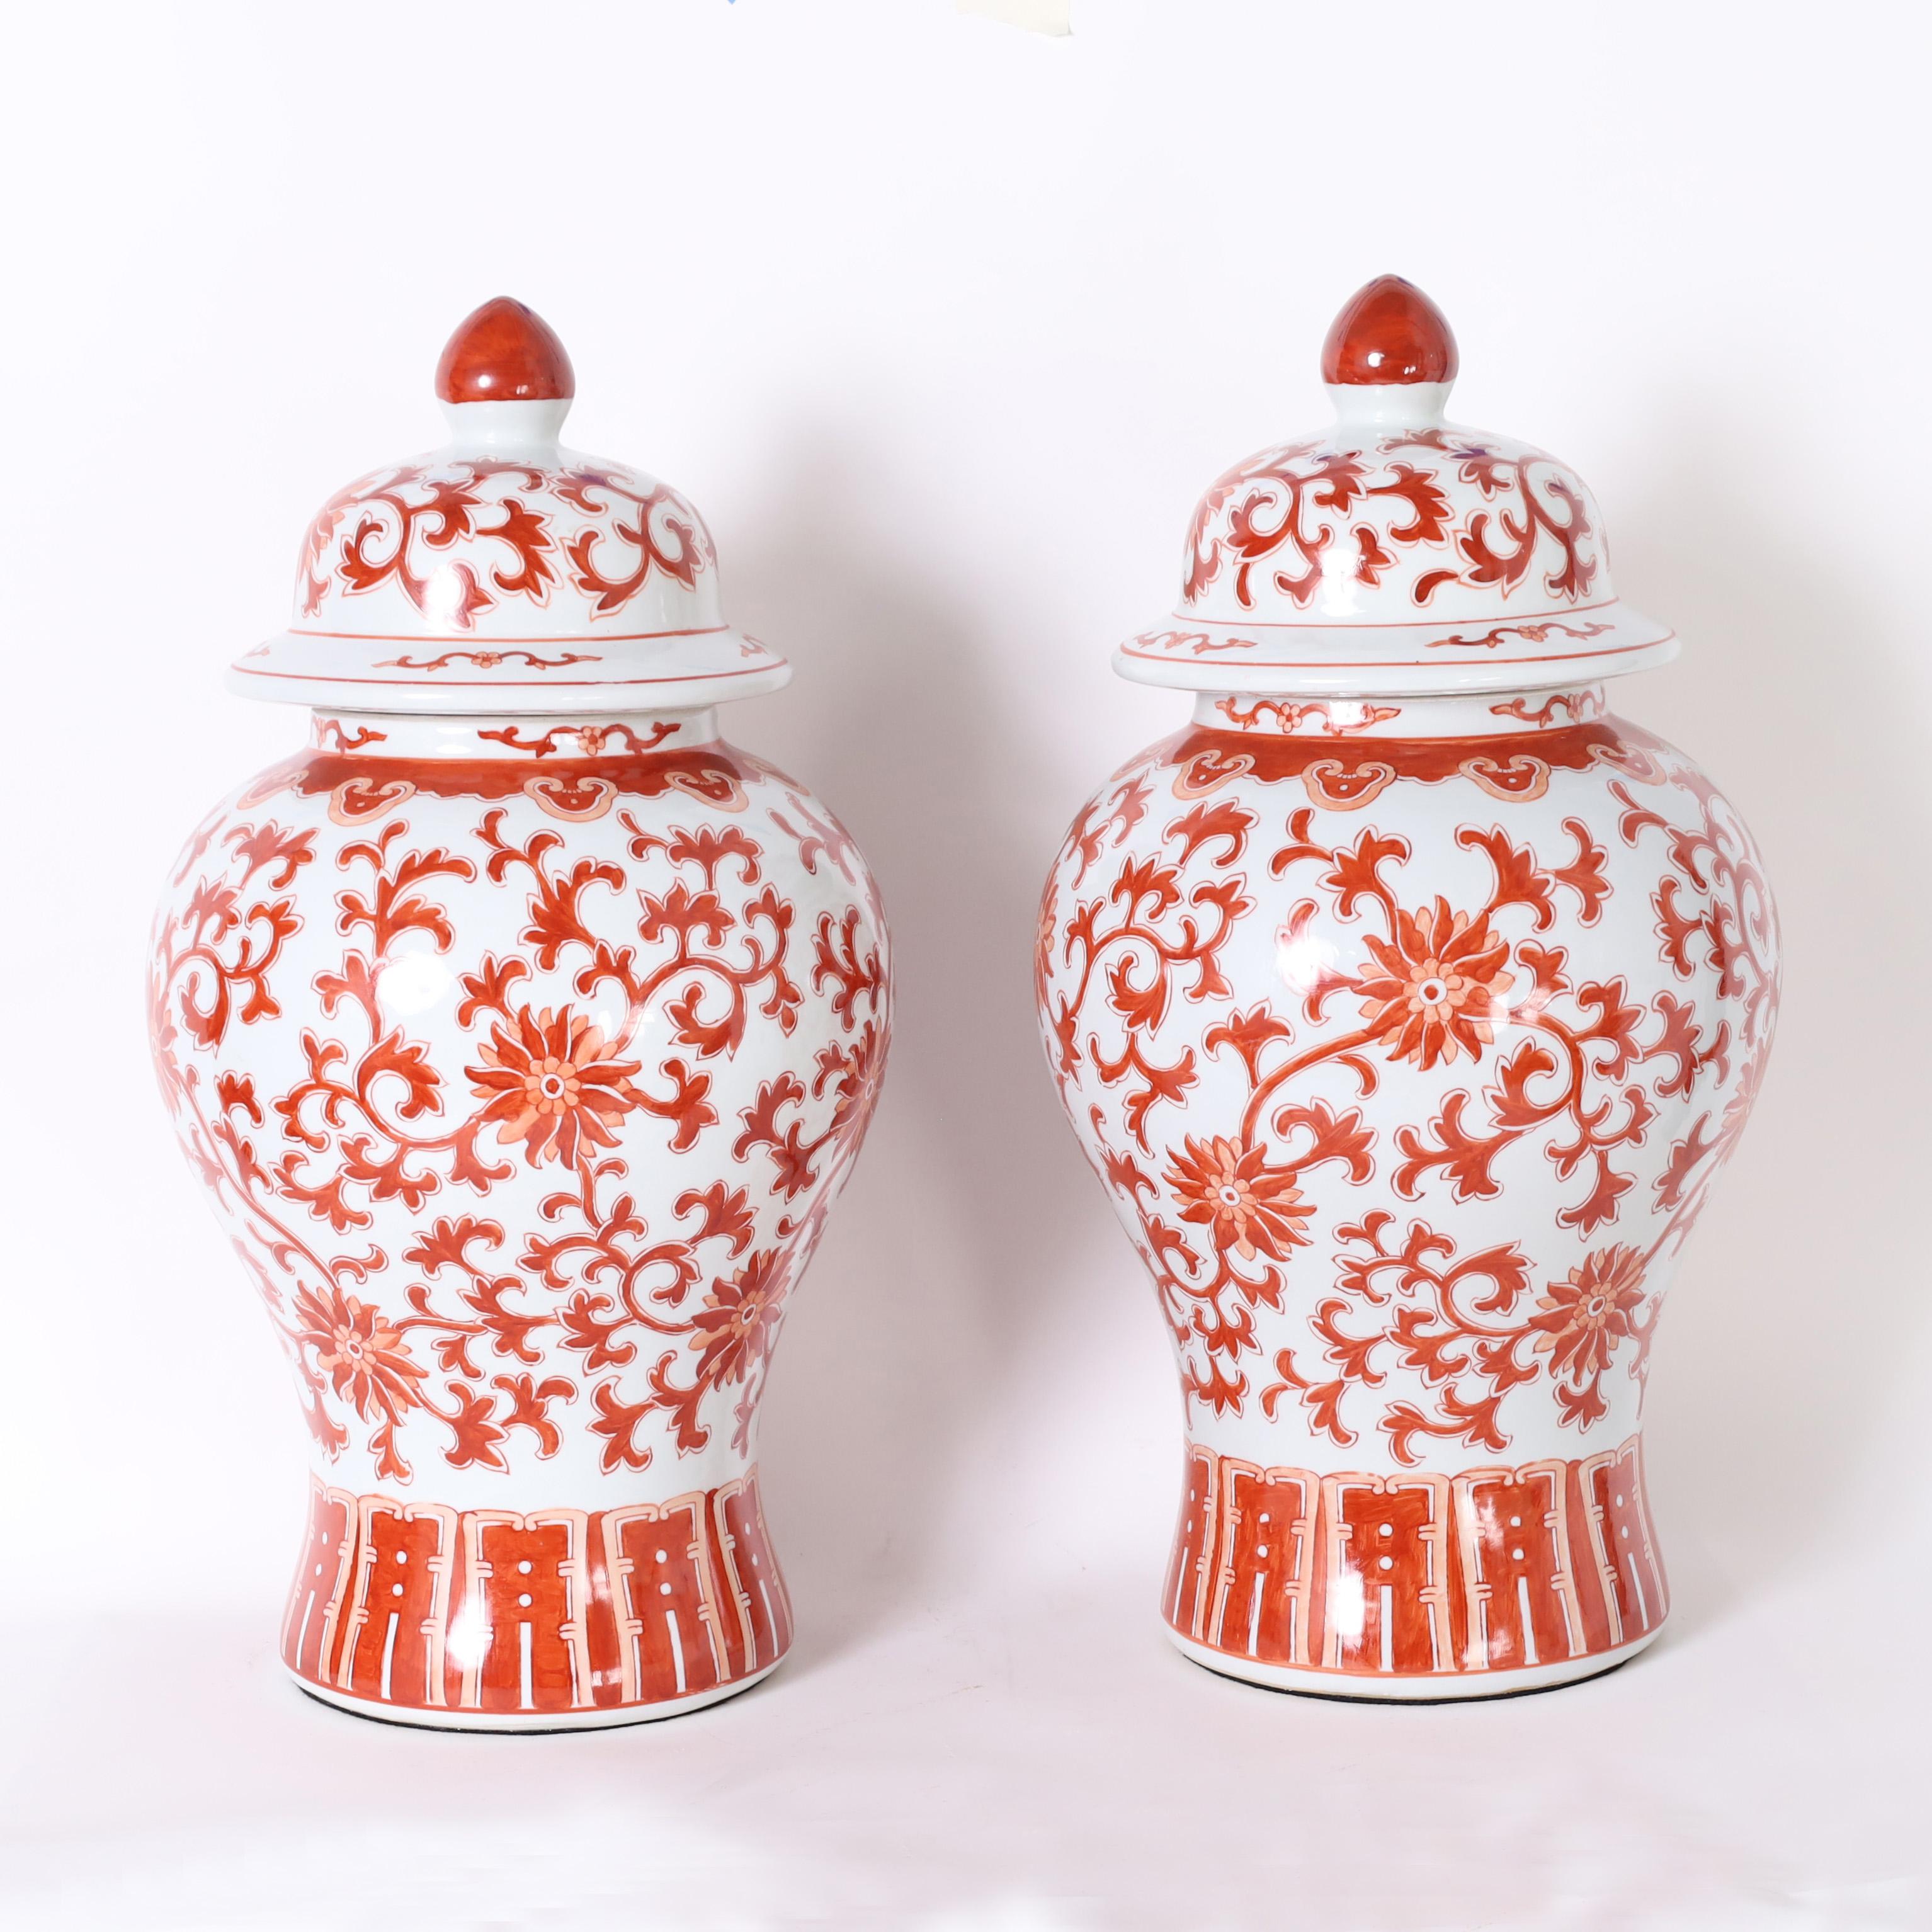 Standout pair of Chinese porcelain lidded urns with classic form hand decorated with flowers and leaves in orange and red.